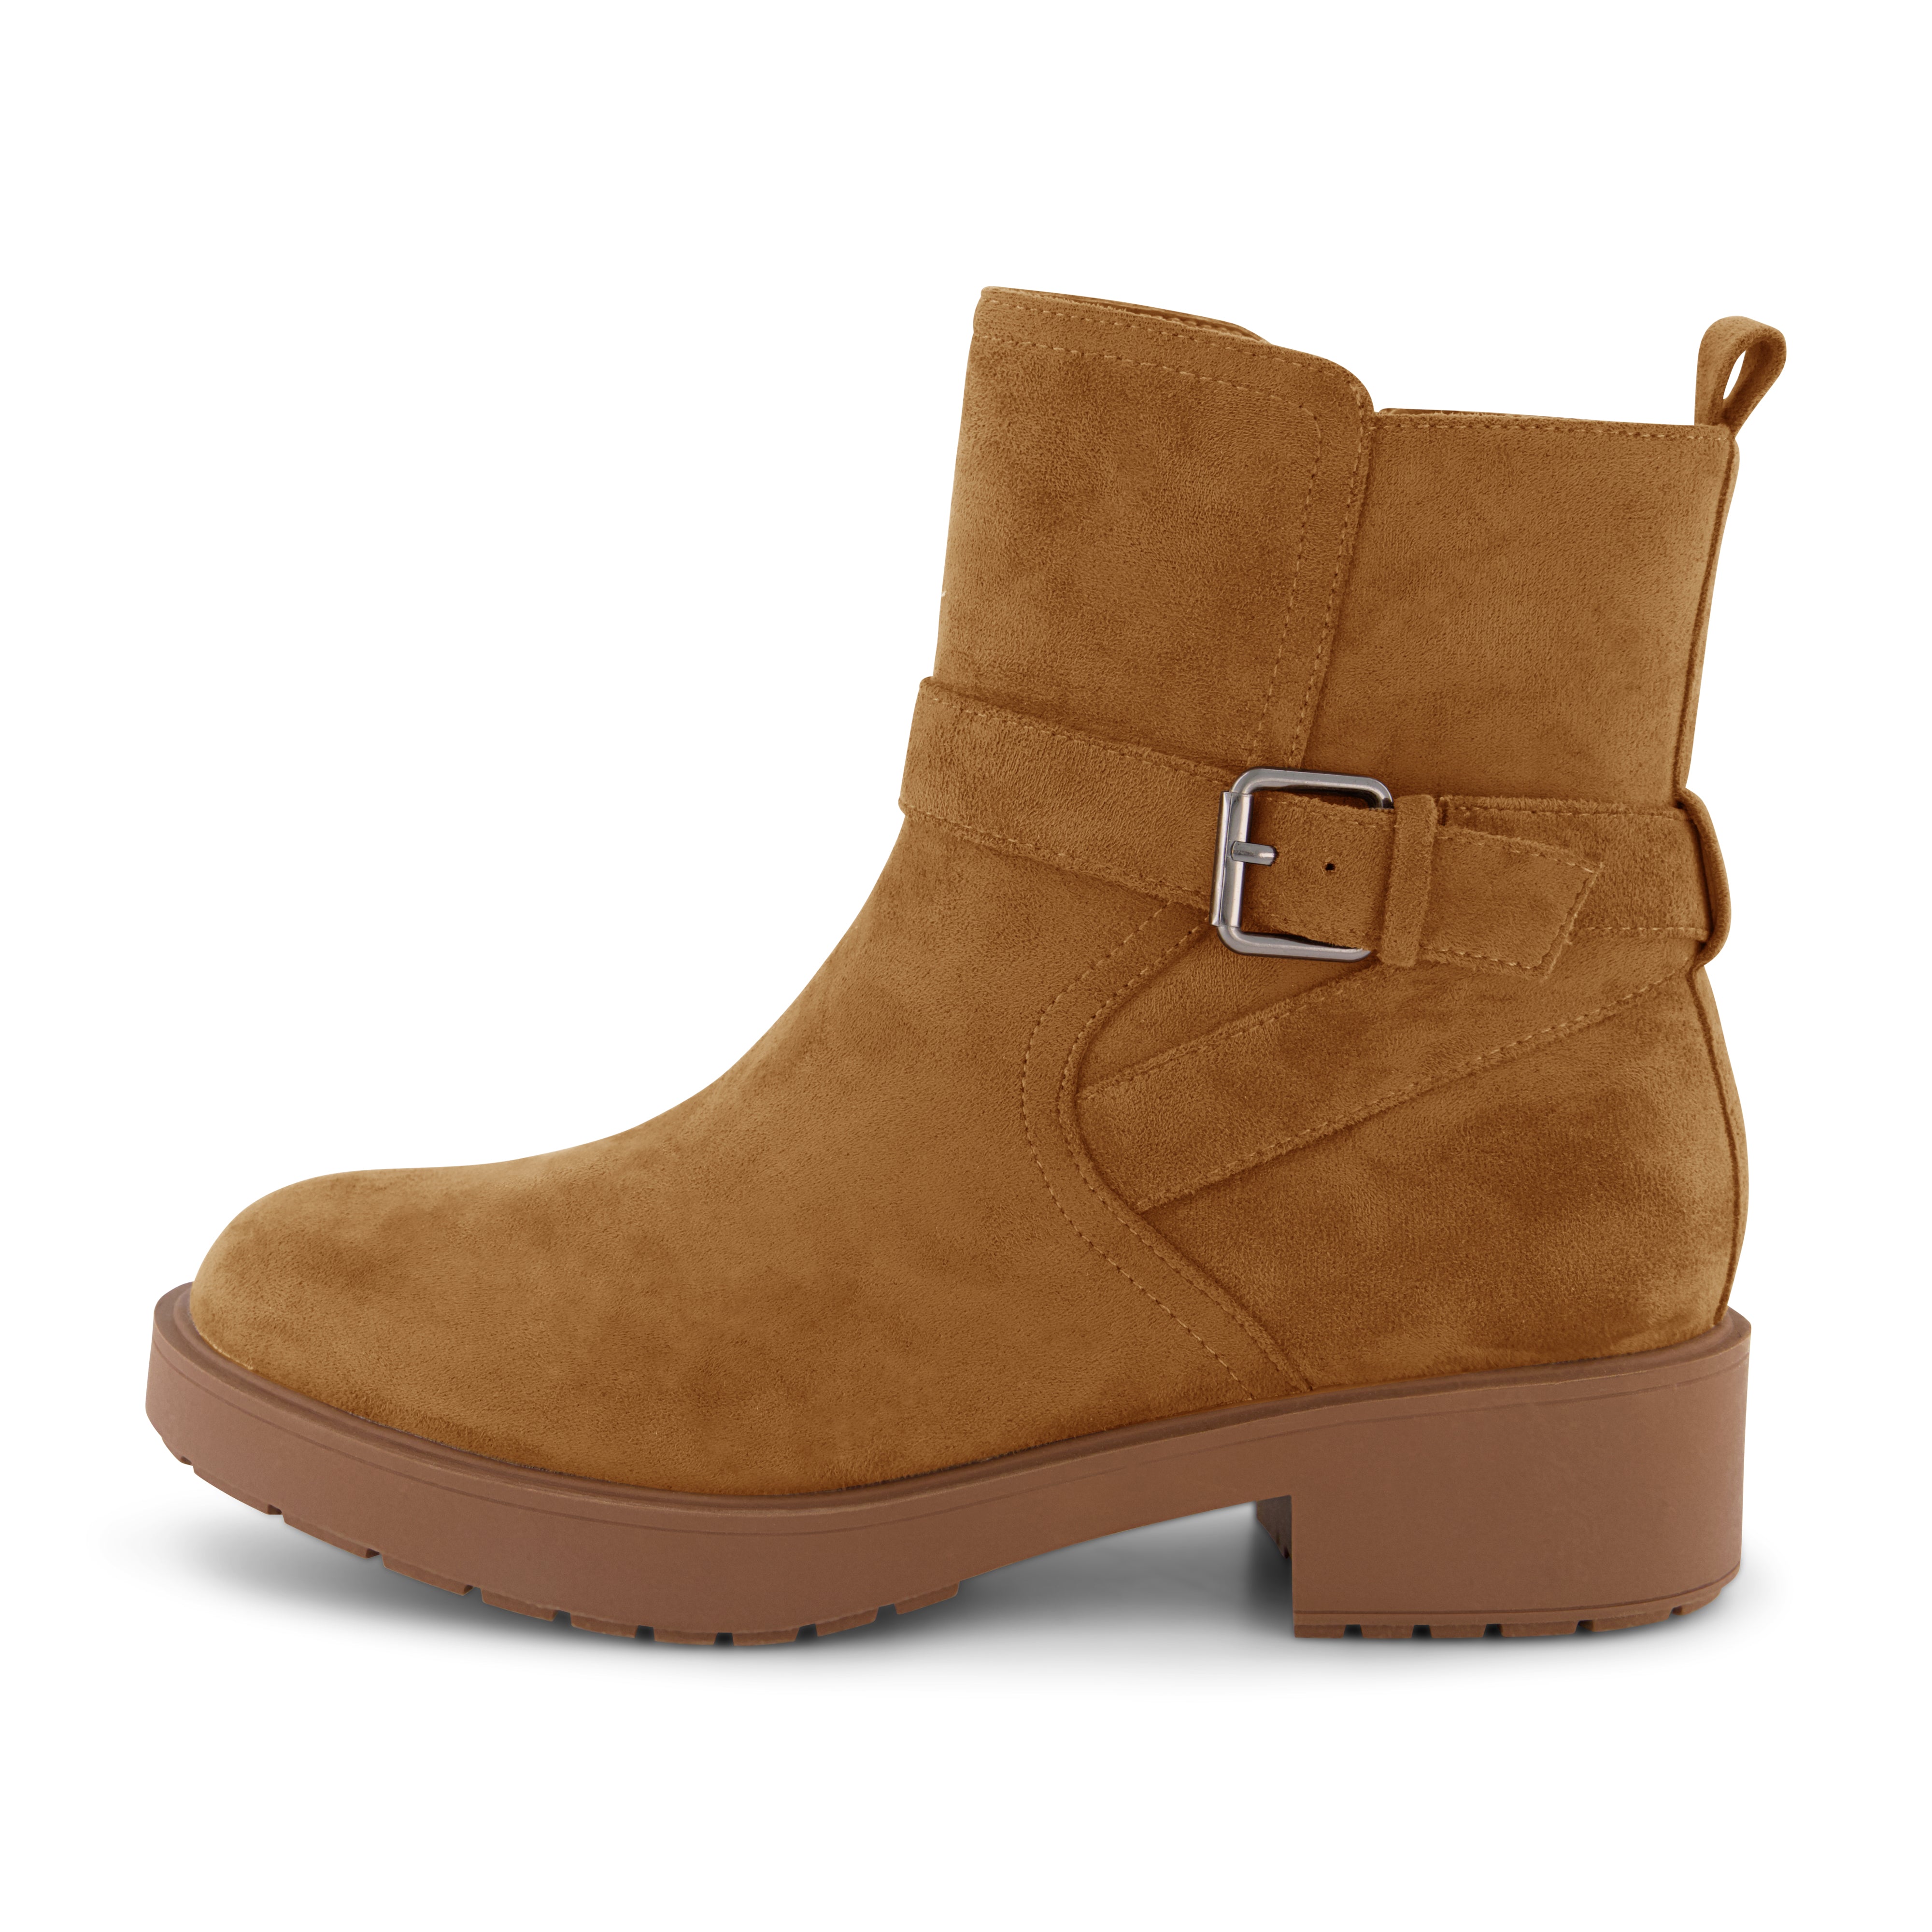 Houston Buckled Ankle Boot